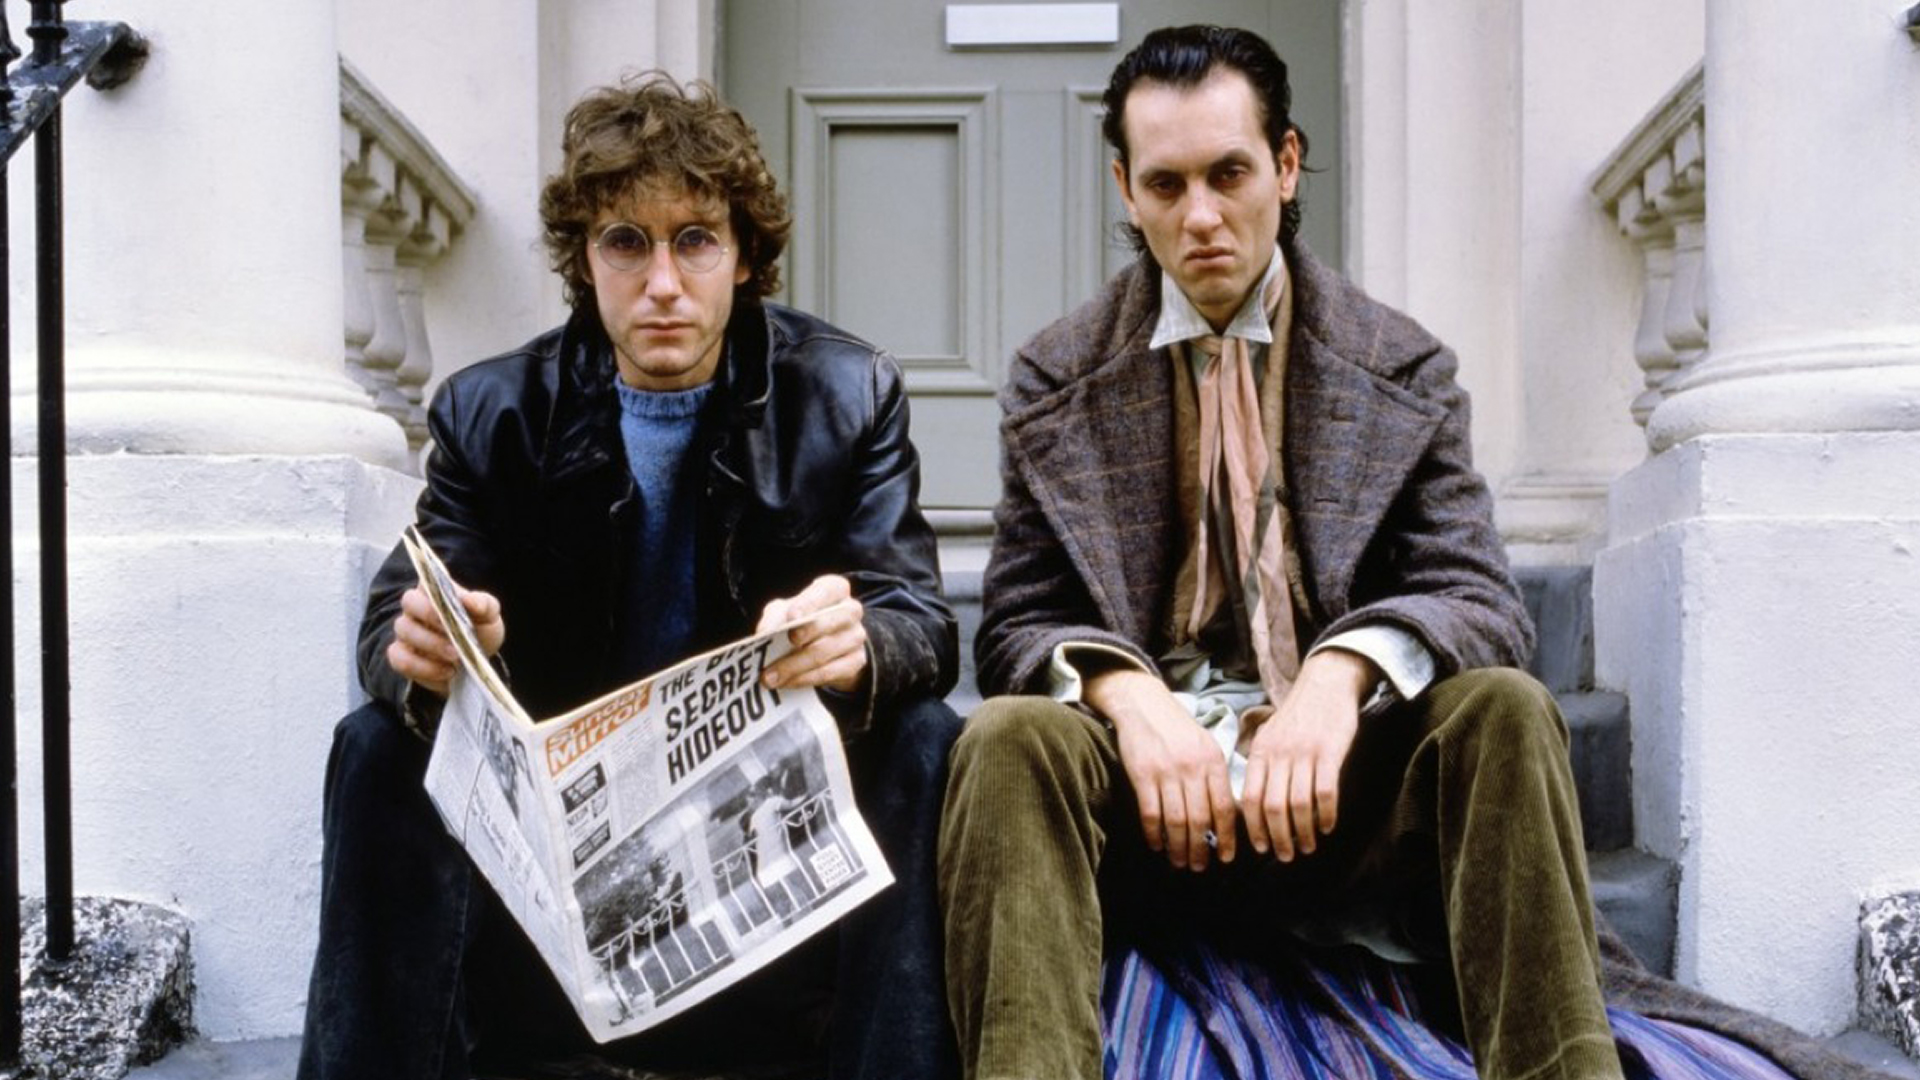 withnail-and-i